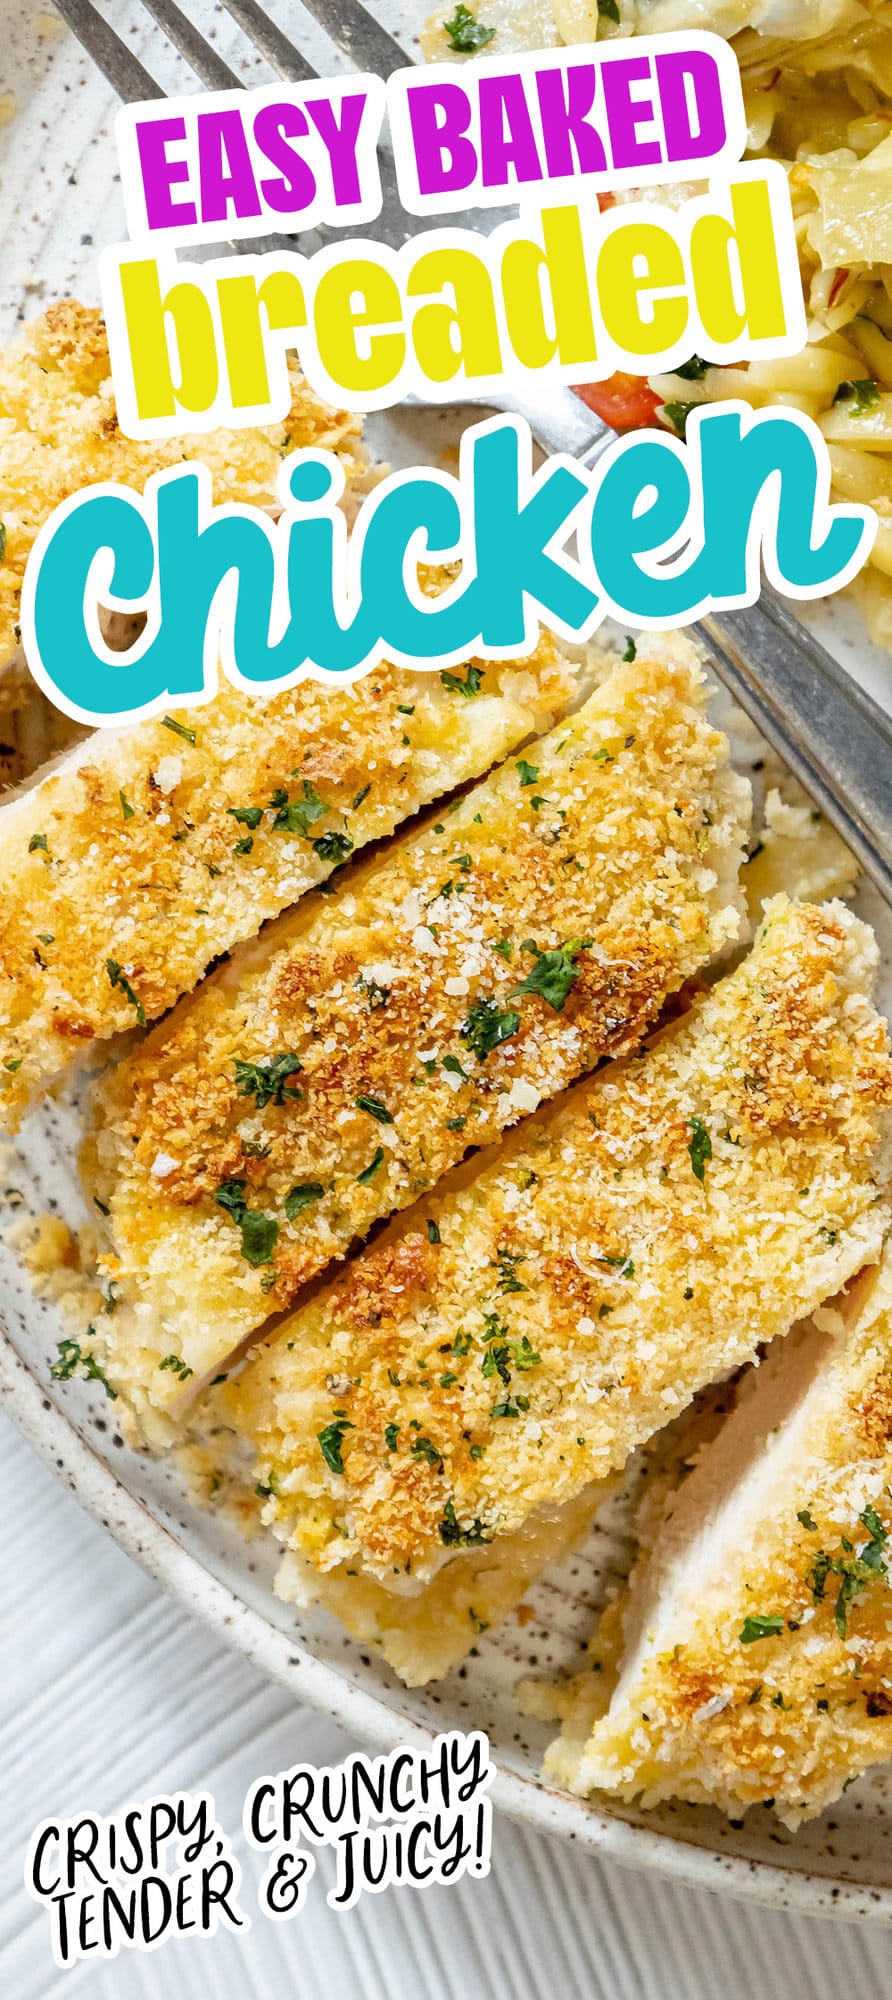 breaded chicken breast on top of orzo pasta, easy baked breaded chicken written across the top,